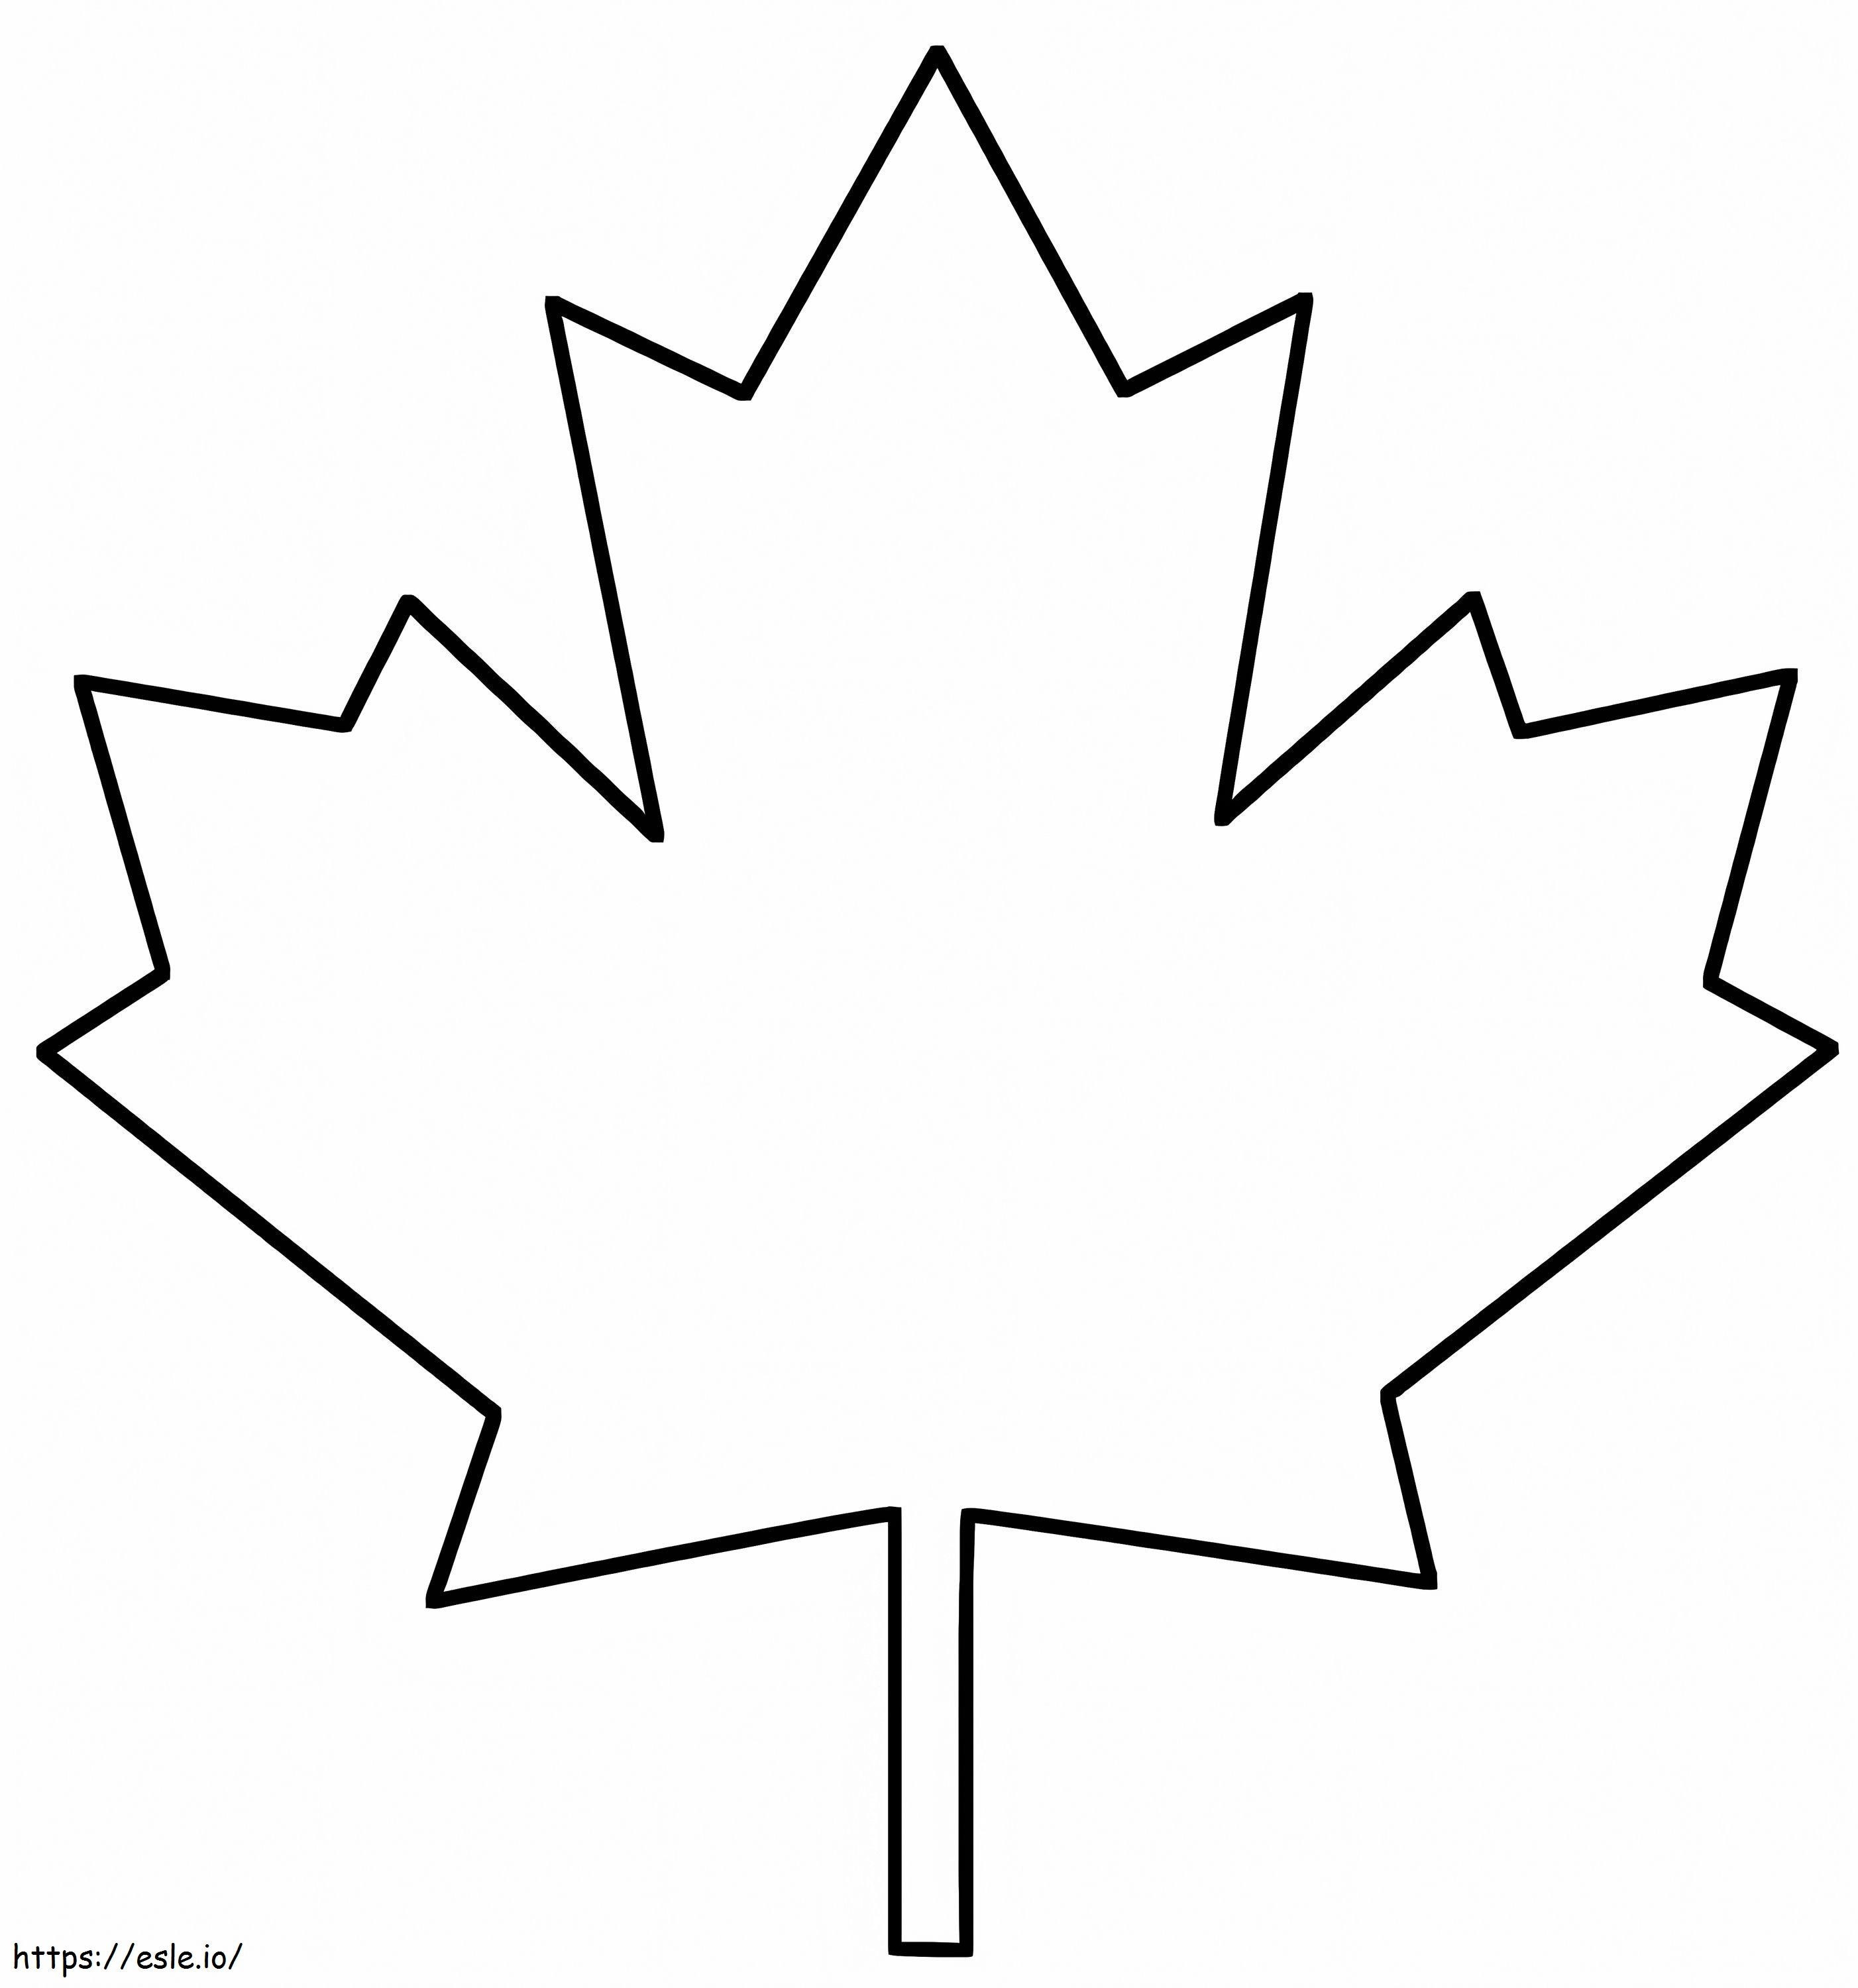 Maple Leaf coloring page